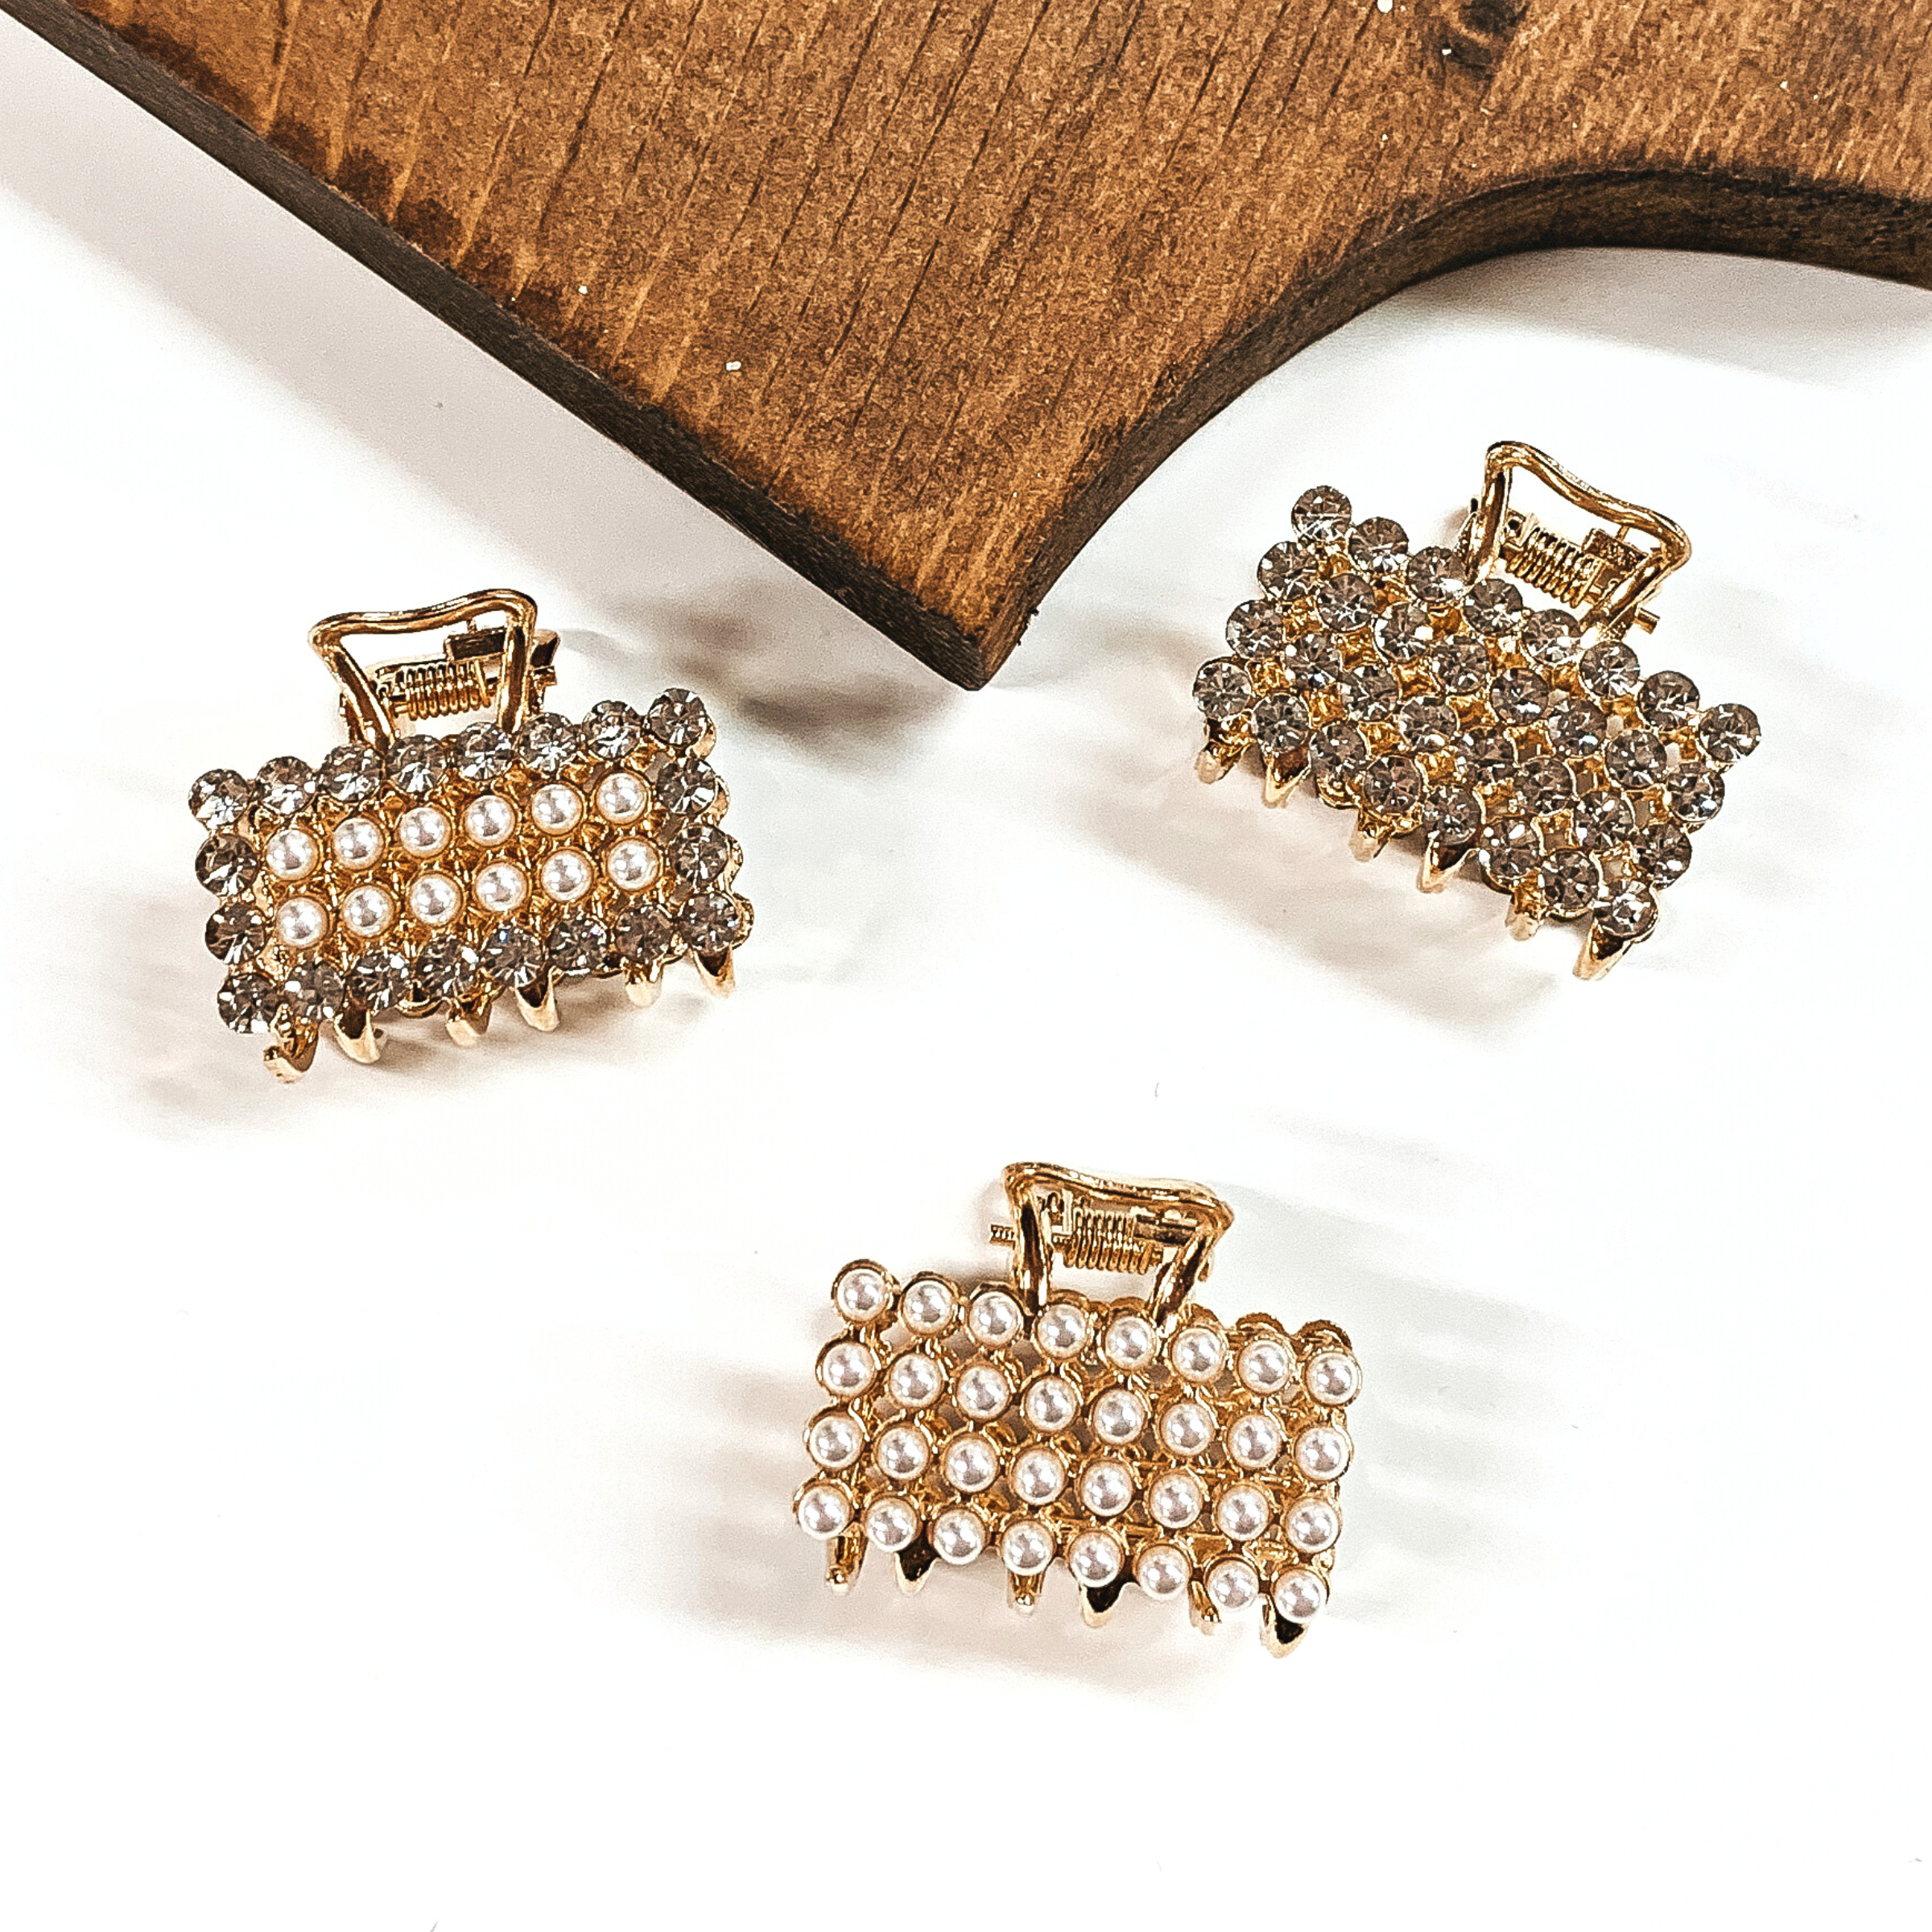 There are three small rectangle clips in gold with different materials. There is a clear crystal and pearl one, clear crystals, and all pearls. These clips are taken on a white background with a slab of wood in the back as decor.